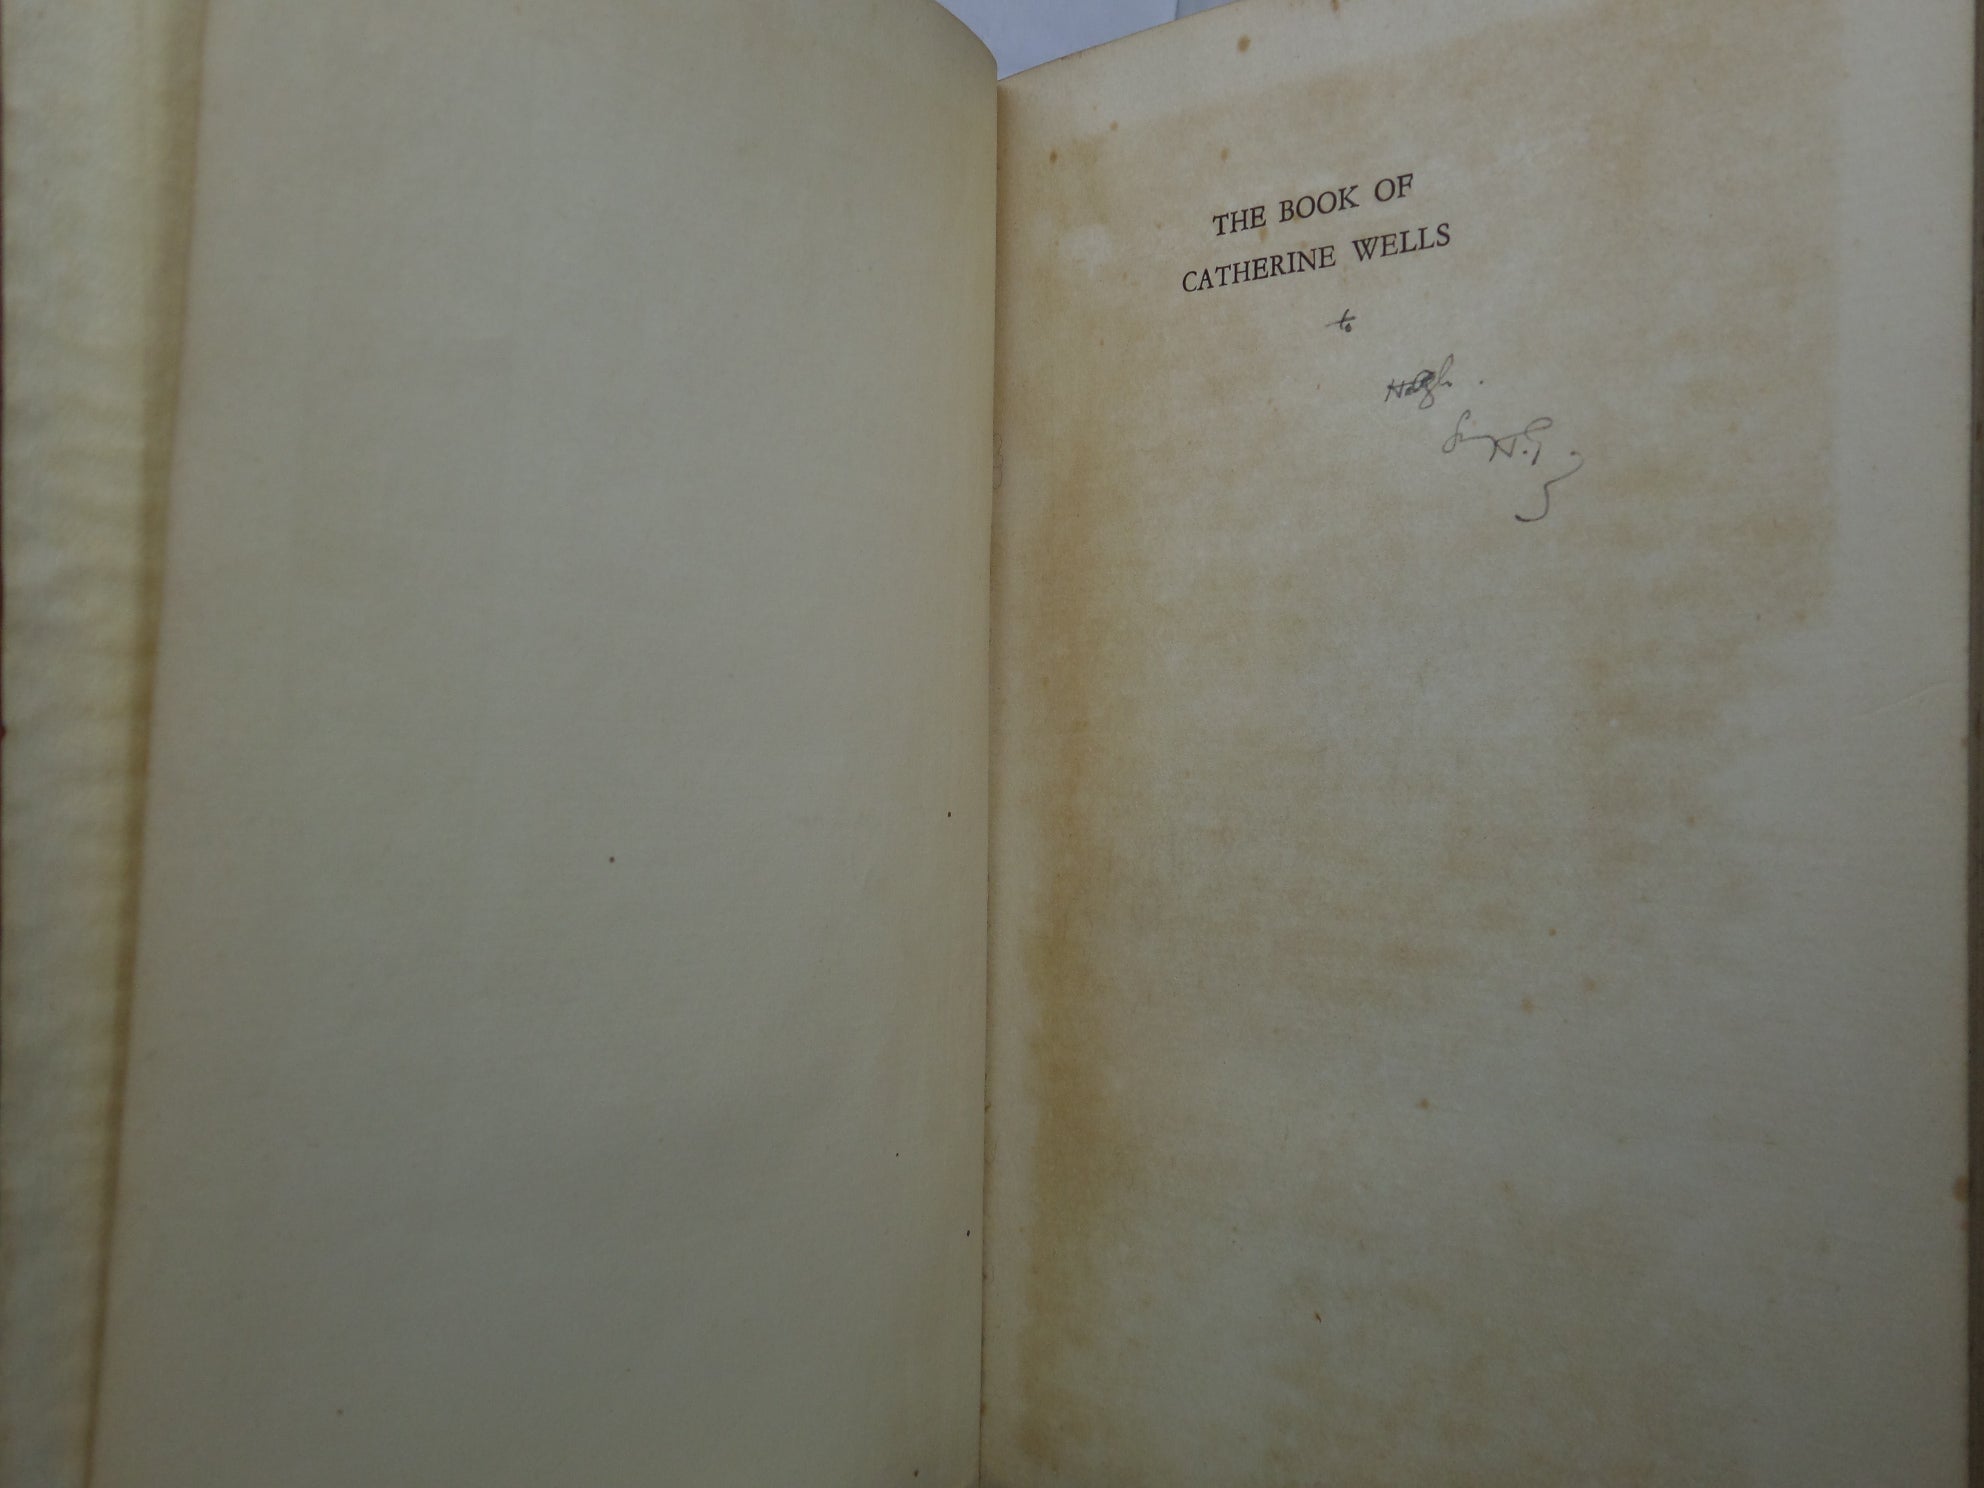 THE BOOK OF CATHERINE WELLS, SIGNED/ INSCRIBED BY H. G. WELLS 1928 FIRST EDITION HARDBACK